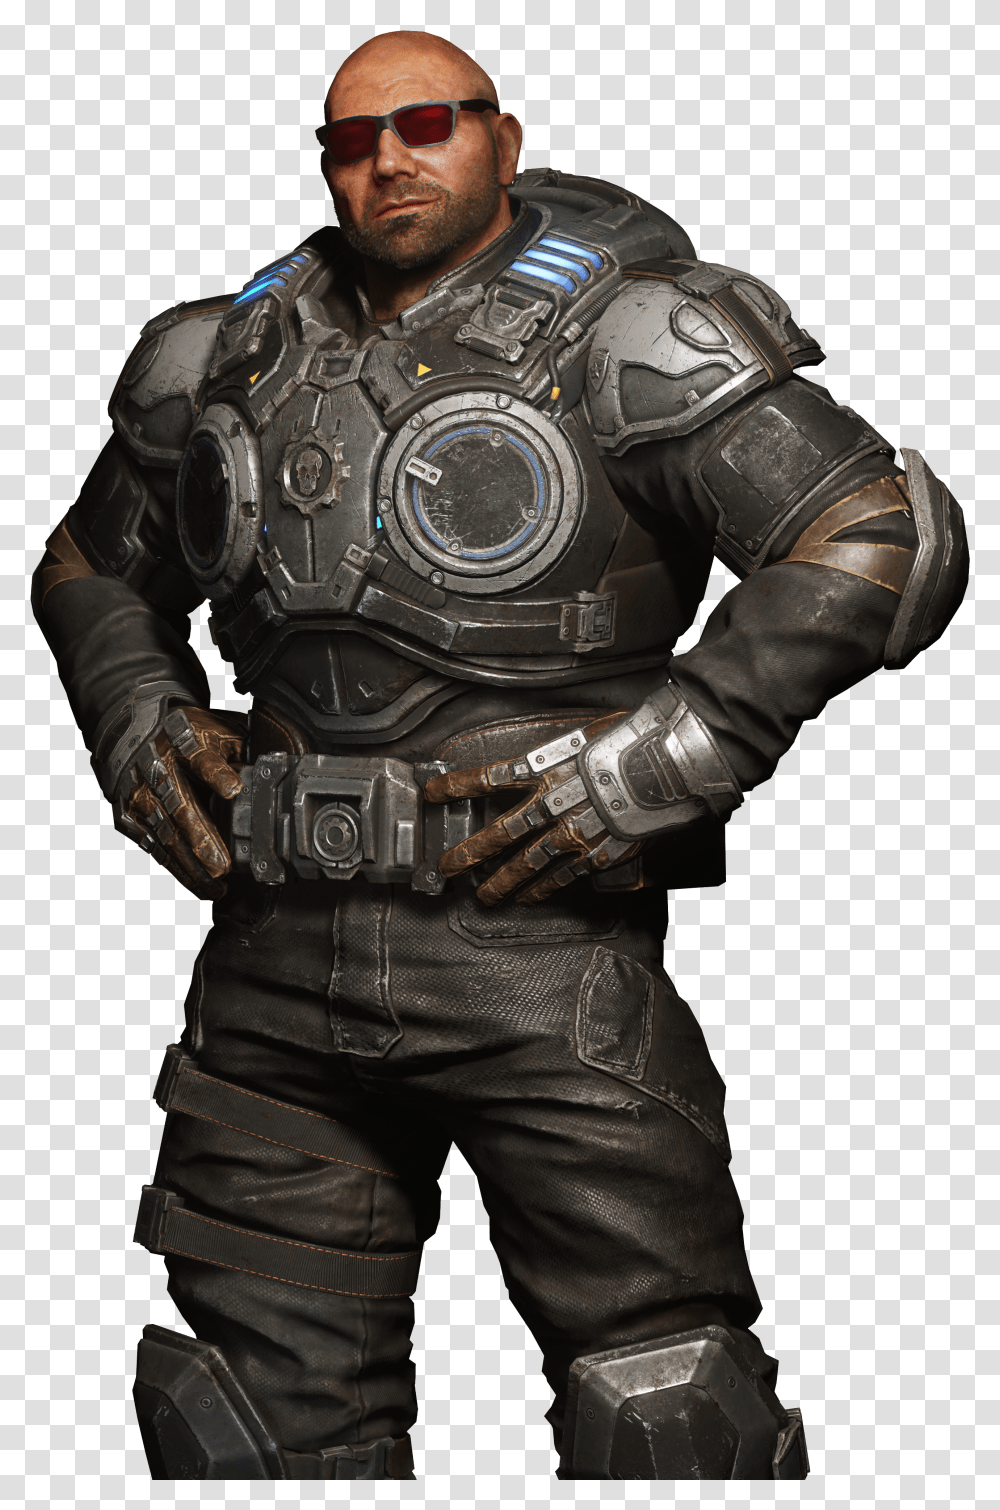 Gears Dave Bautista Gears Transparent Png